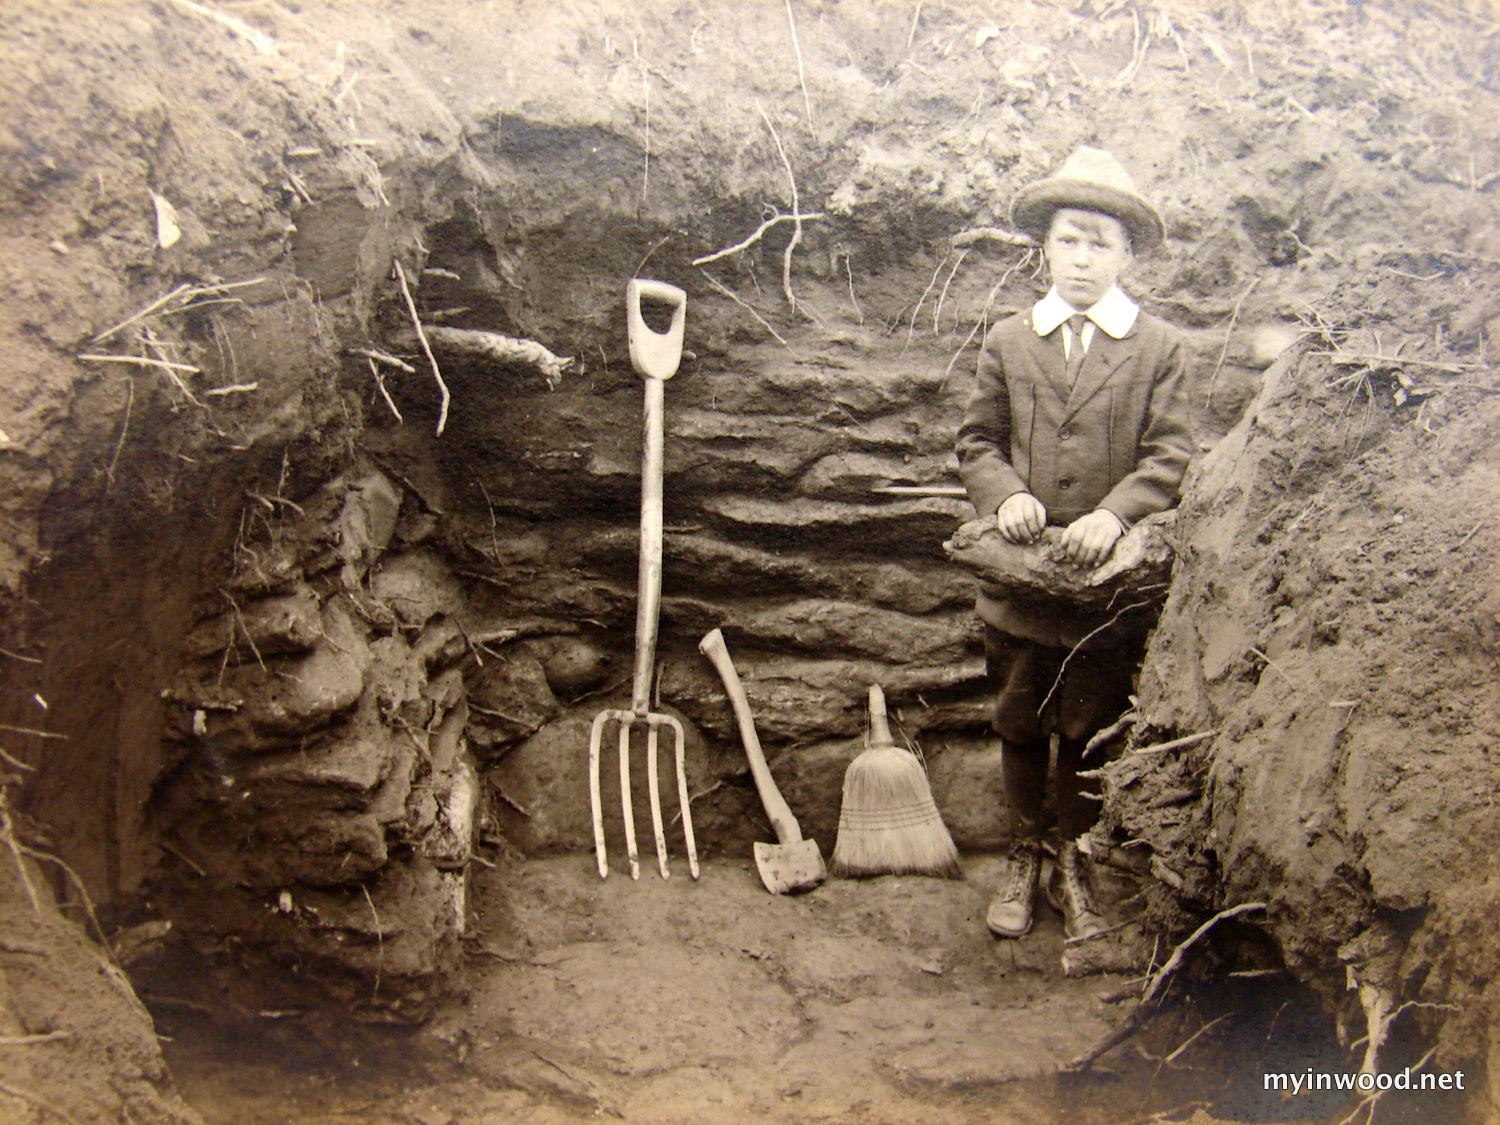 Seaman Avenue and West 204th Street,1922, excavation of Revolutionary War site.